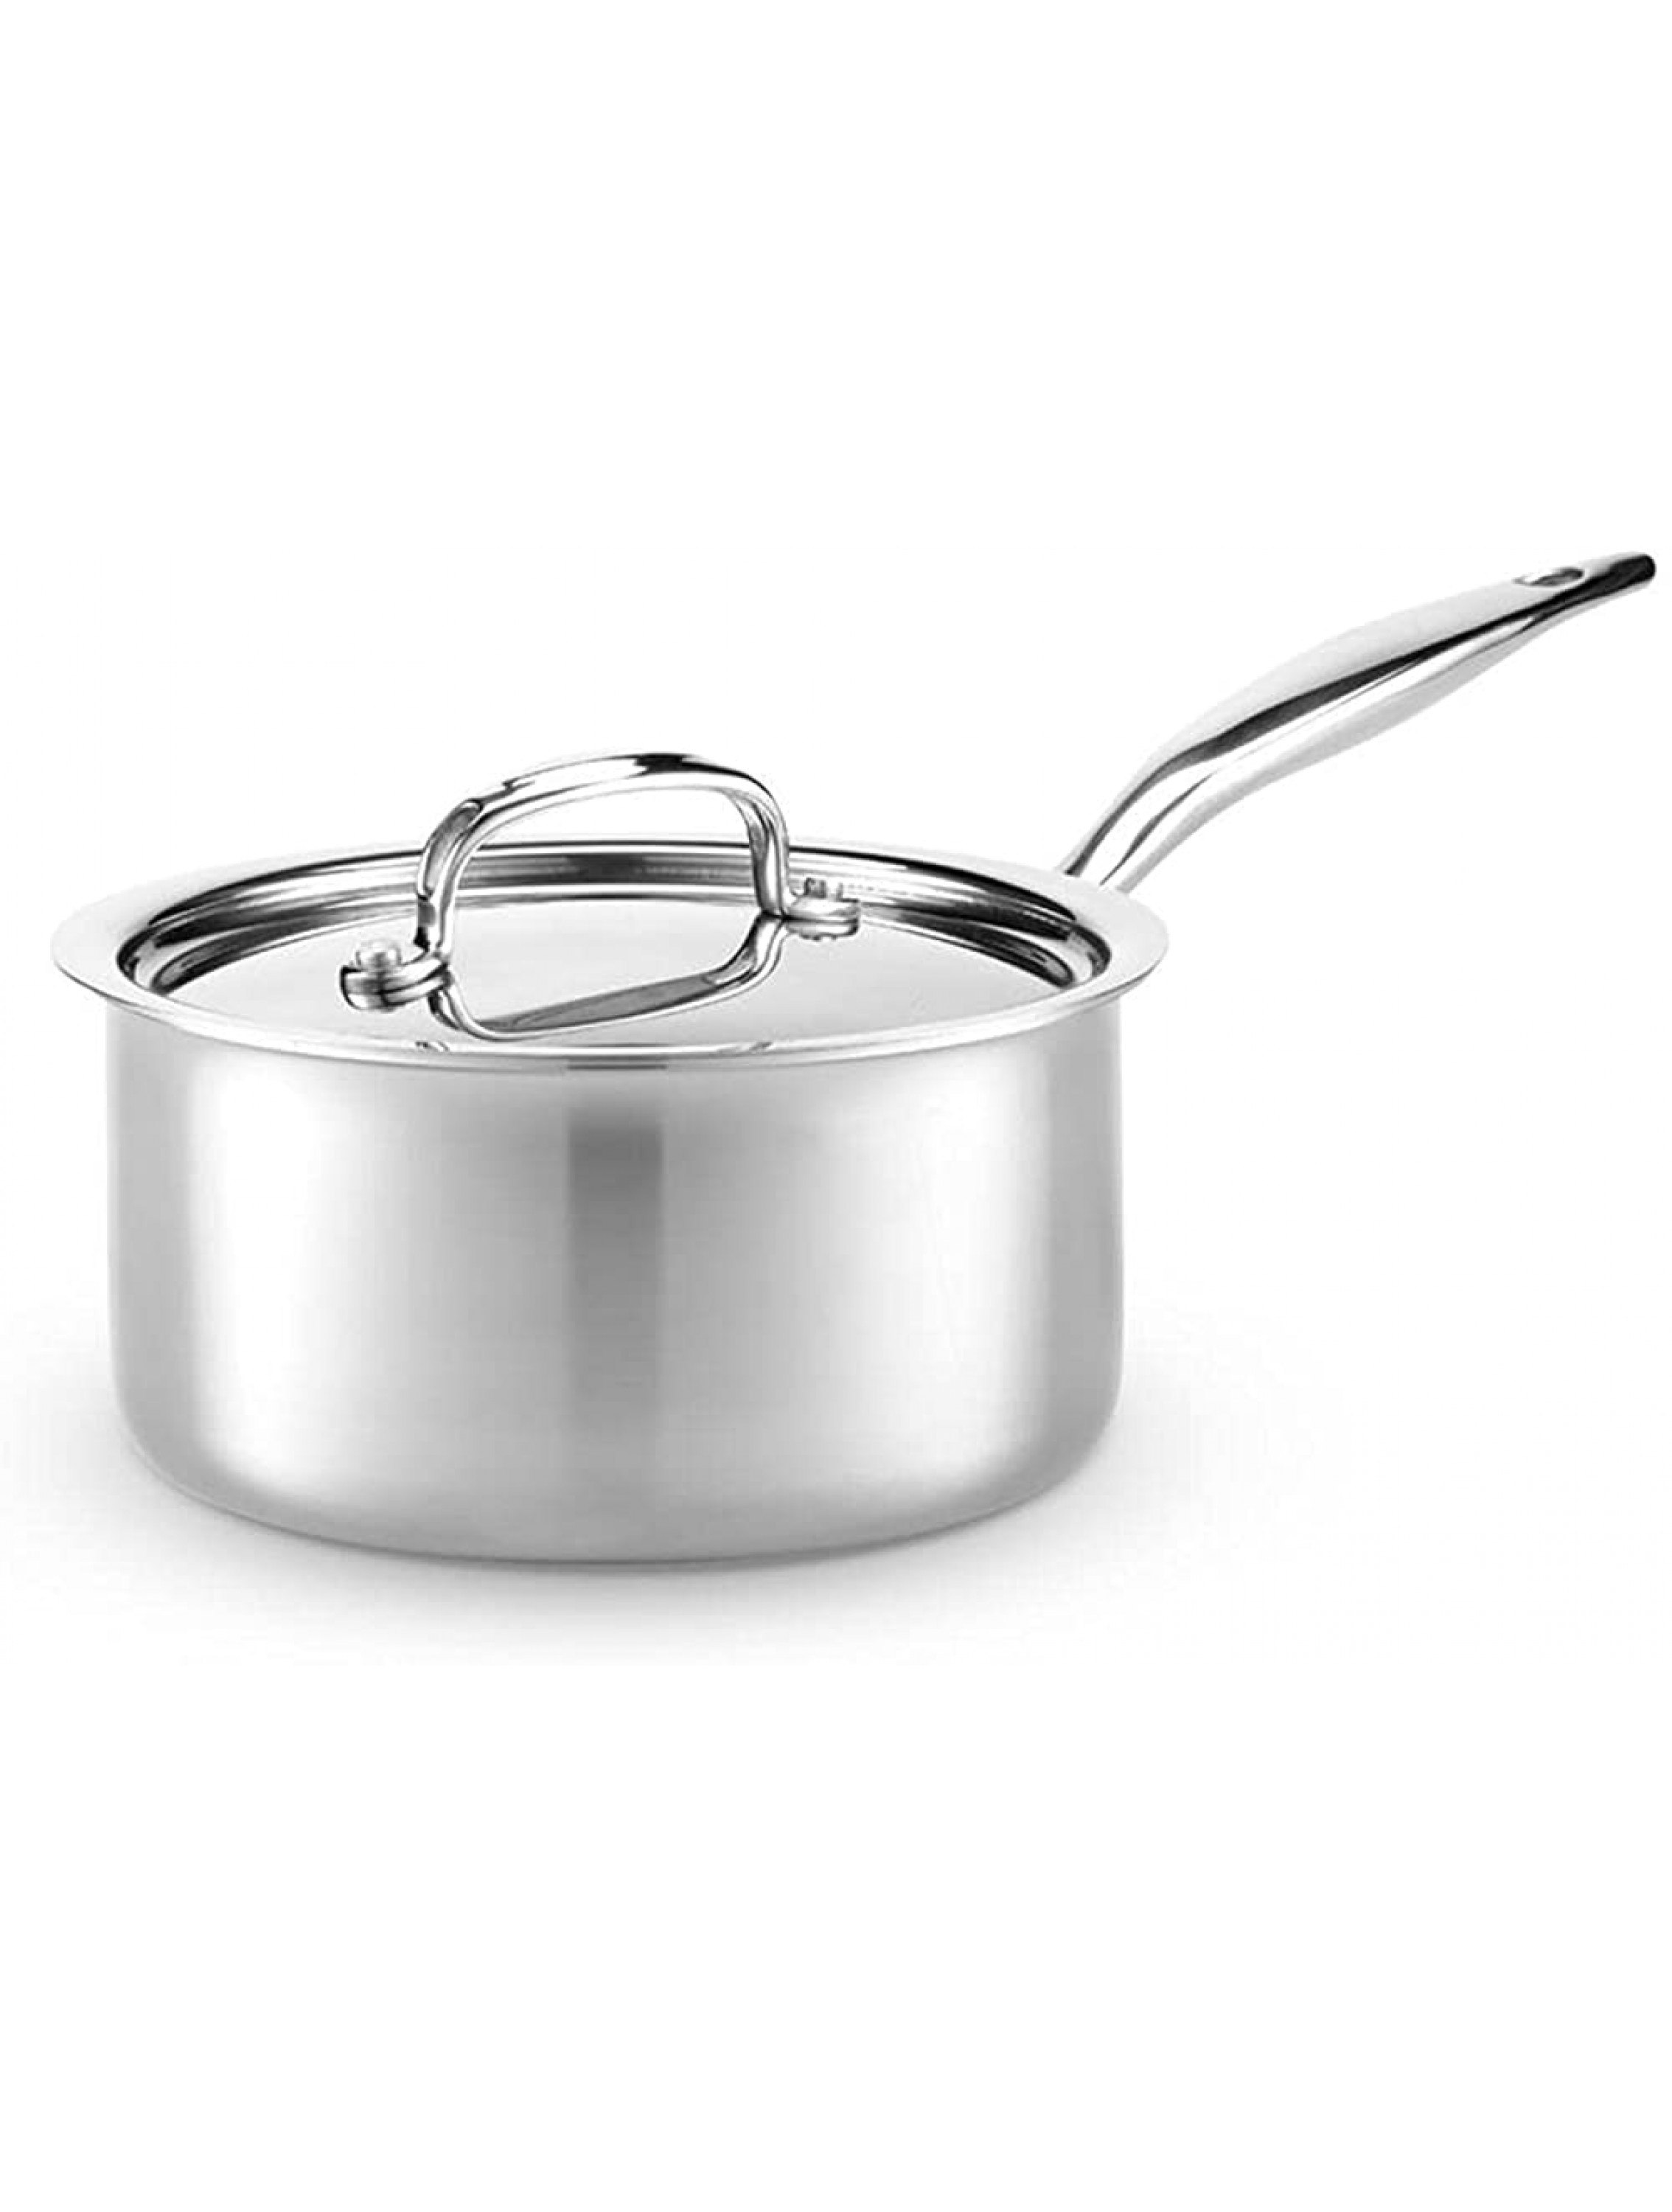 Heritage Steel 3 Quart Saucepan Titanium Strengthened 316Ti Stainless Steel with 5-Ply Construction Induction-Ready and Fully Clad Made in USA - BWKN9KJ18